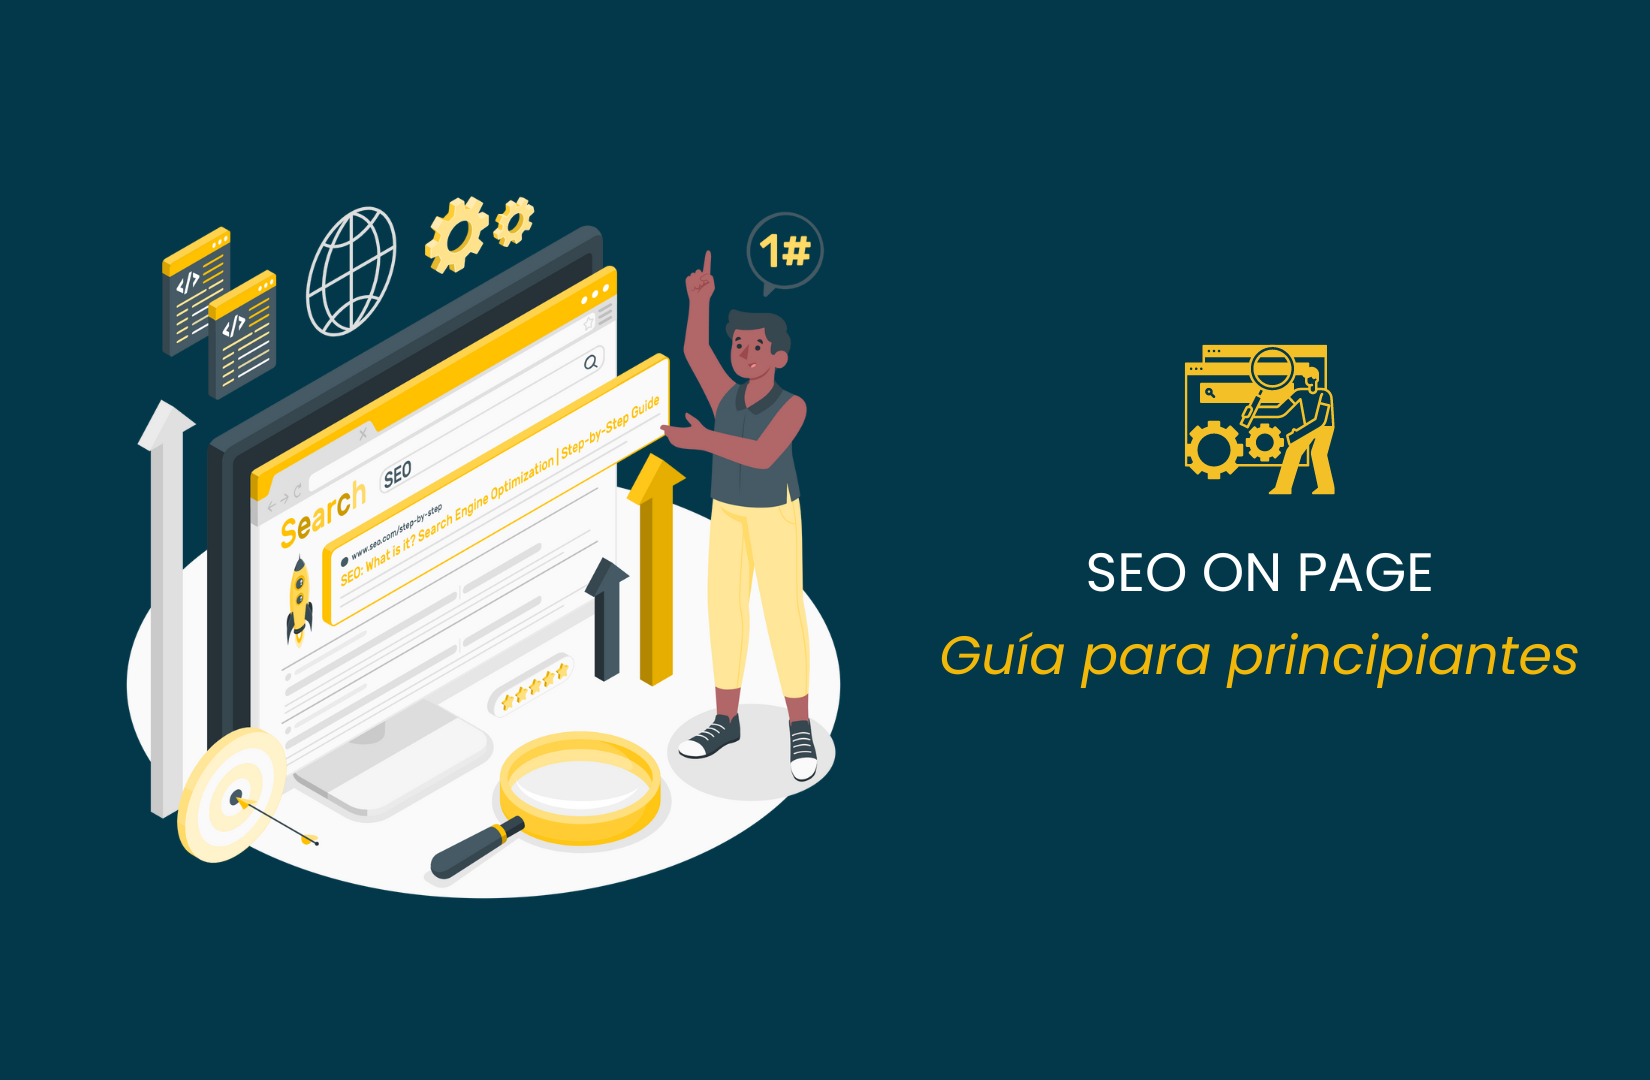 SEO ON PAGE